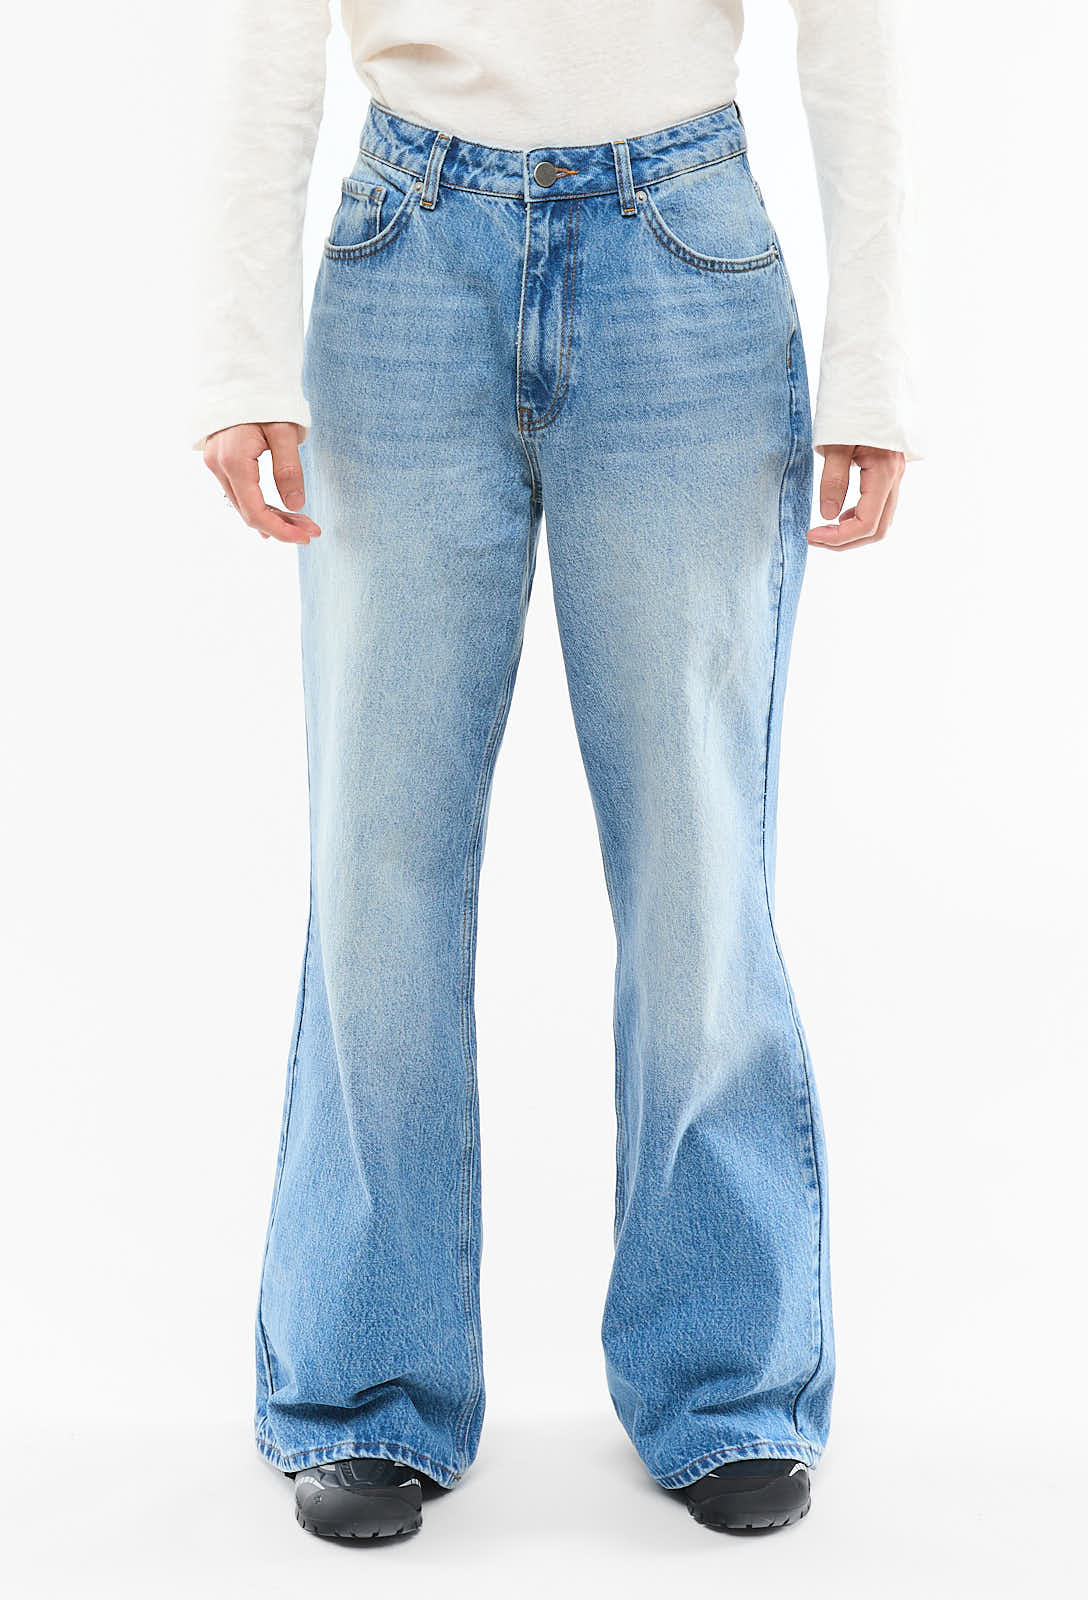 Pearled Ivory Blue Non Distressed Denim